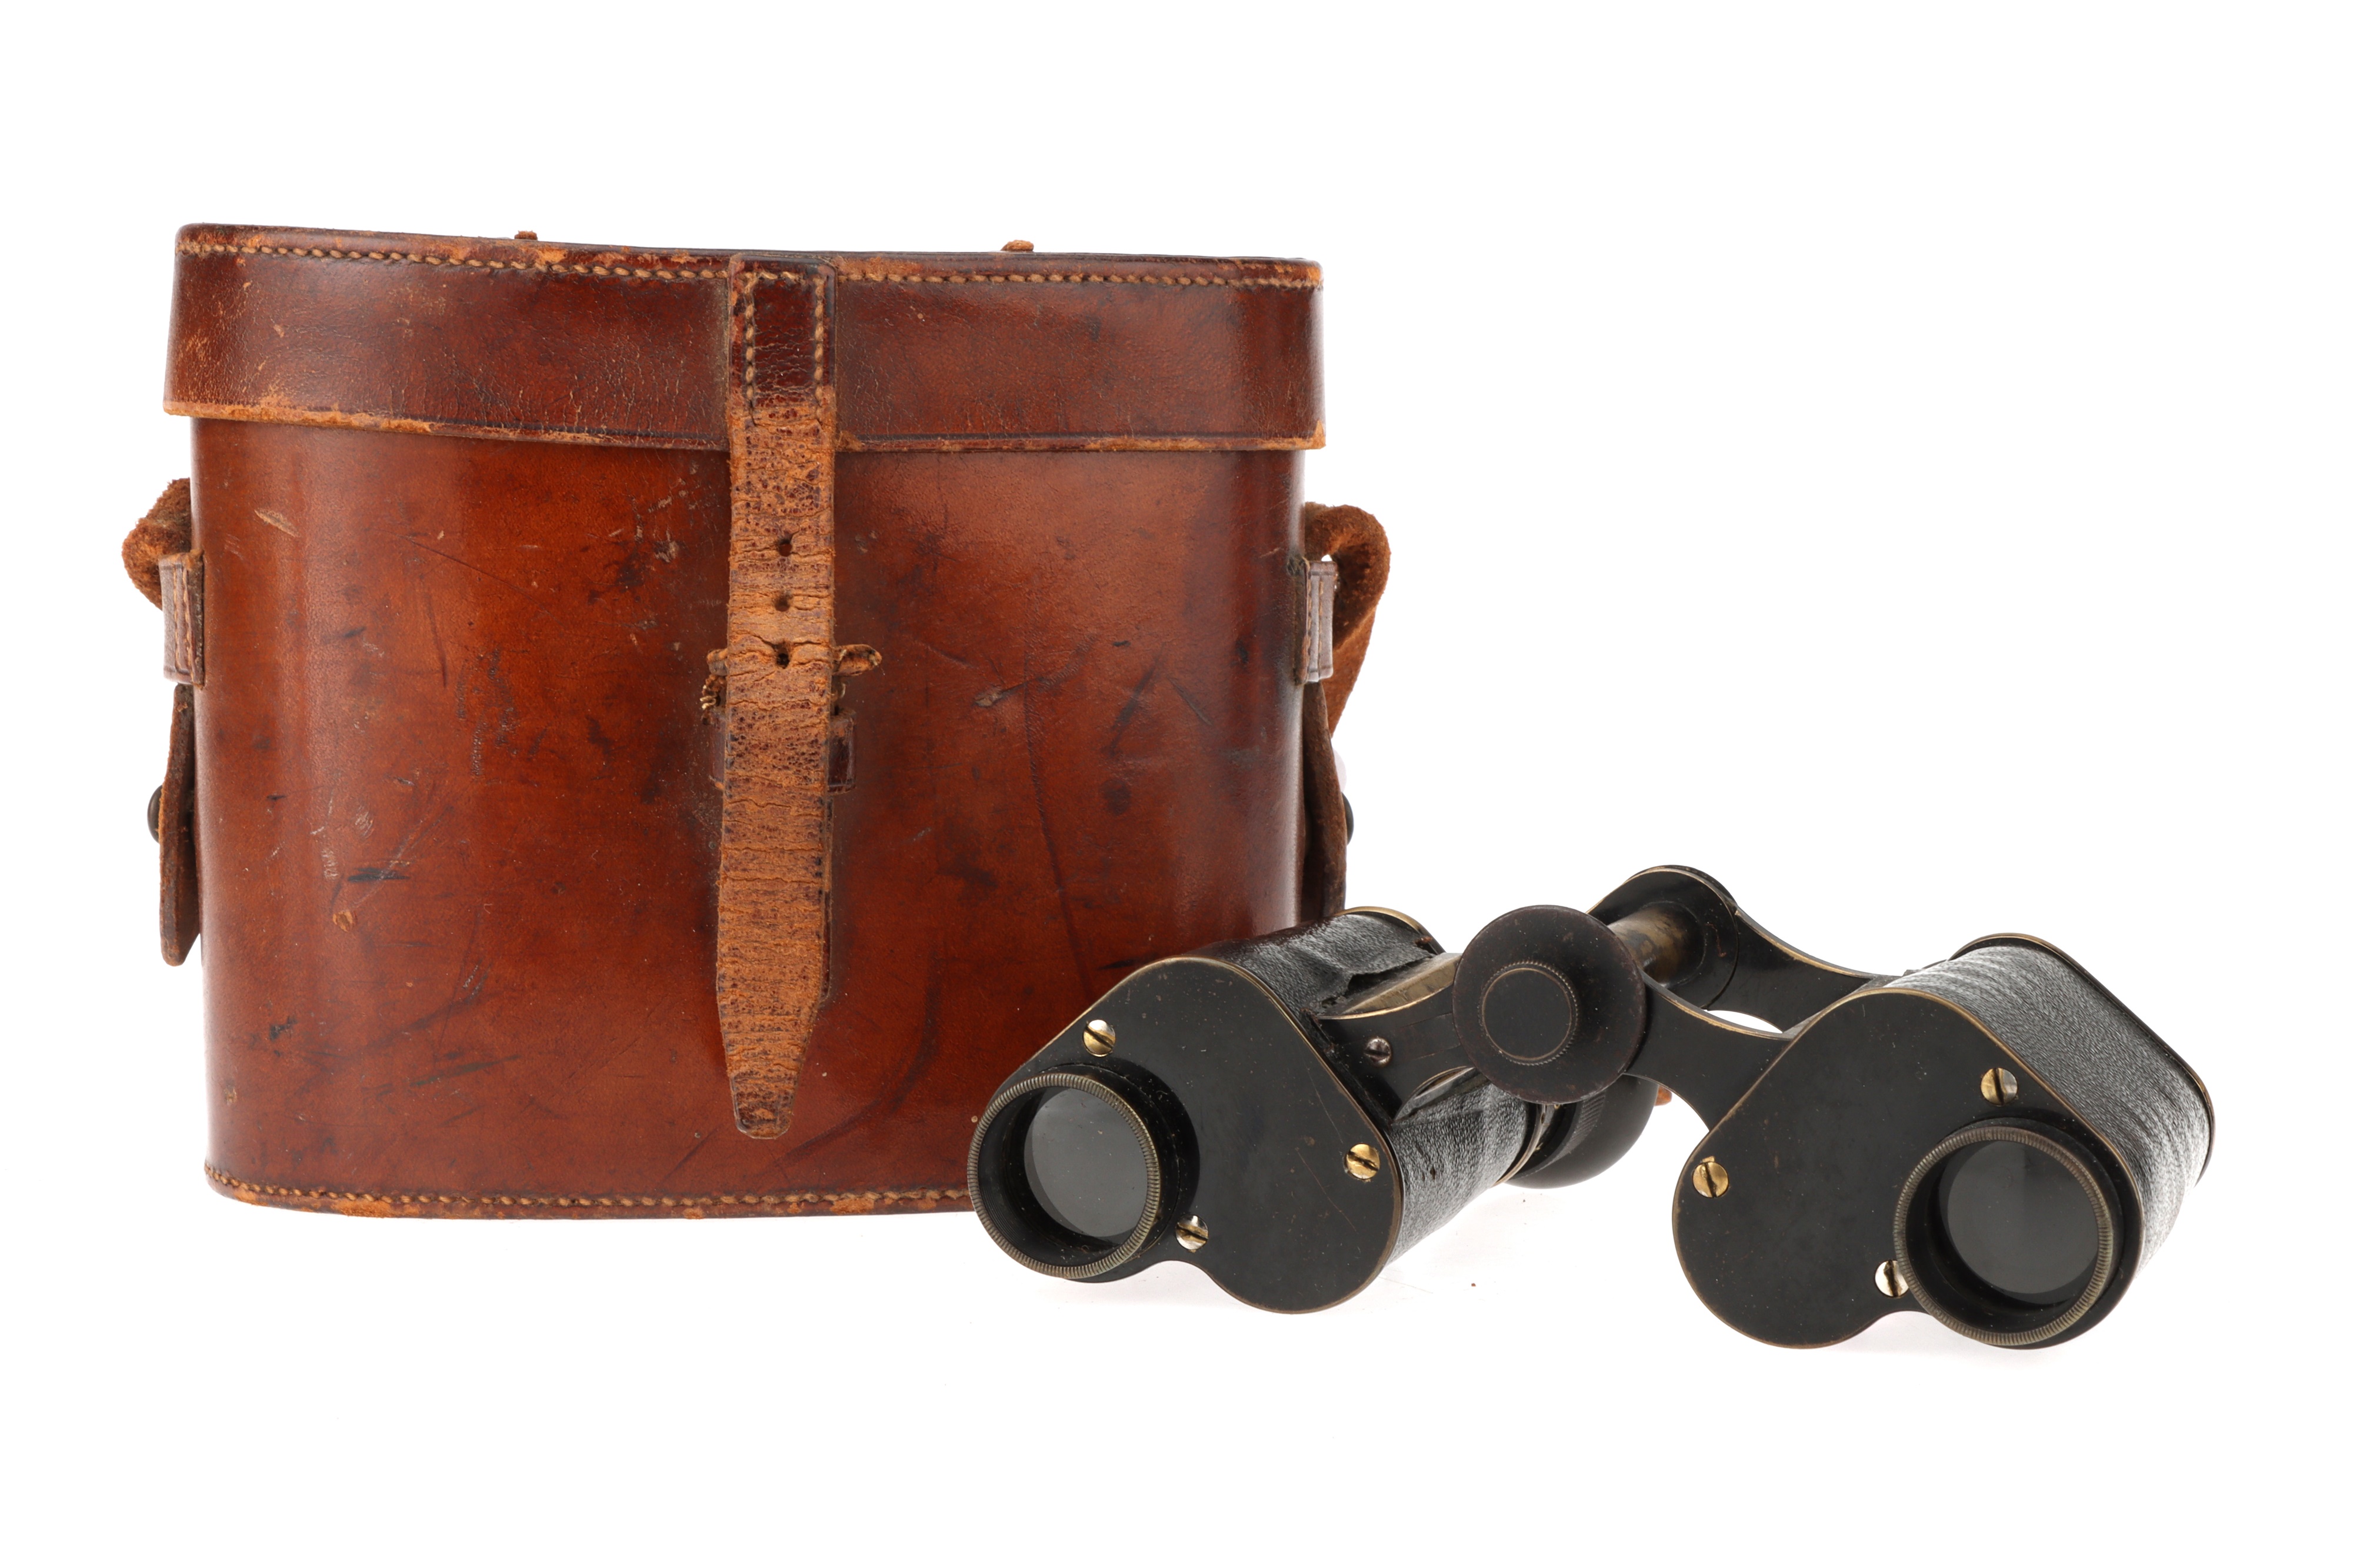 An Early Set of Binoculars By Zeiss - Image 4 of 6